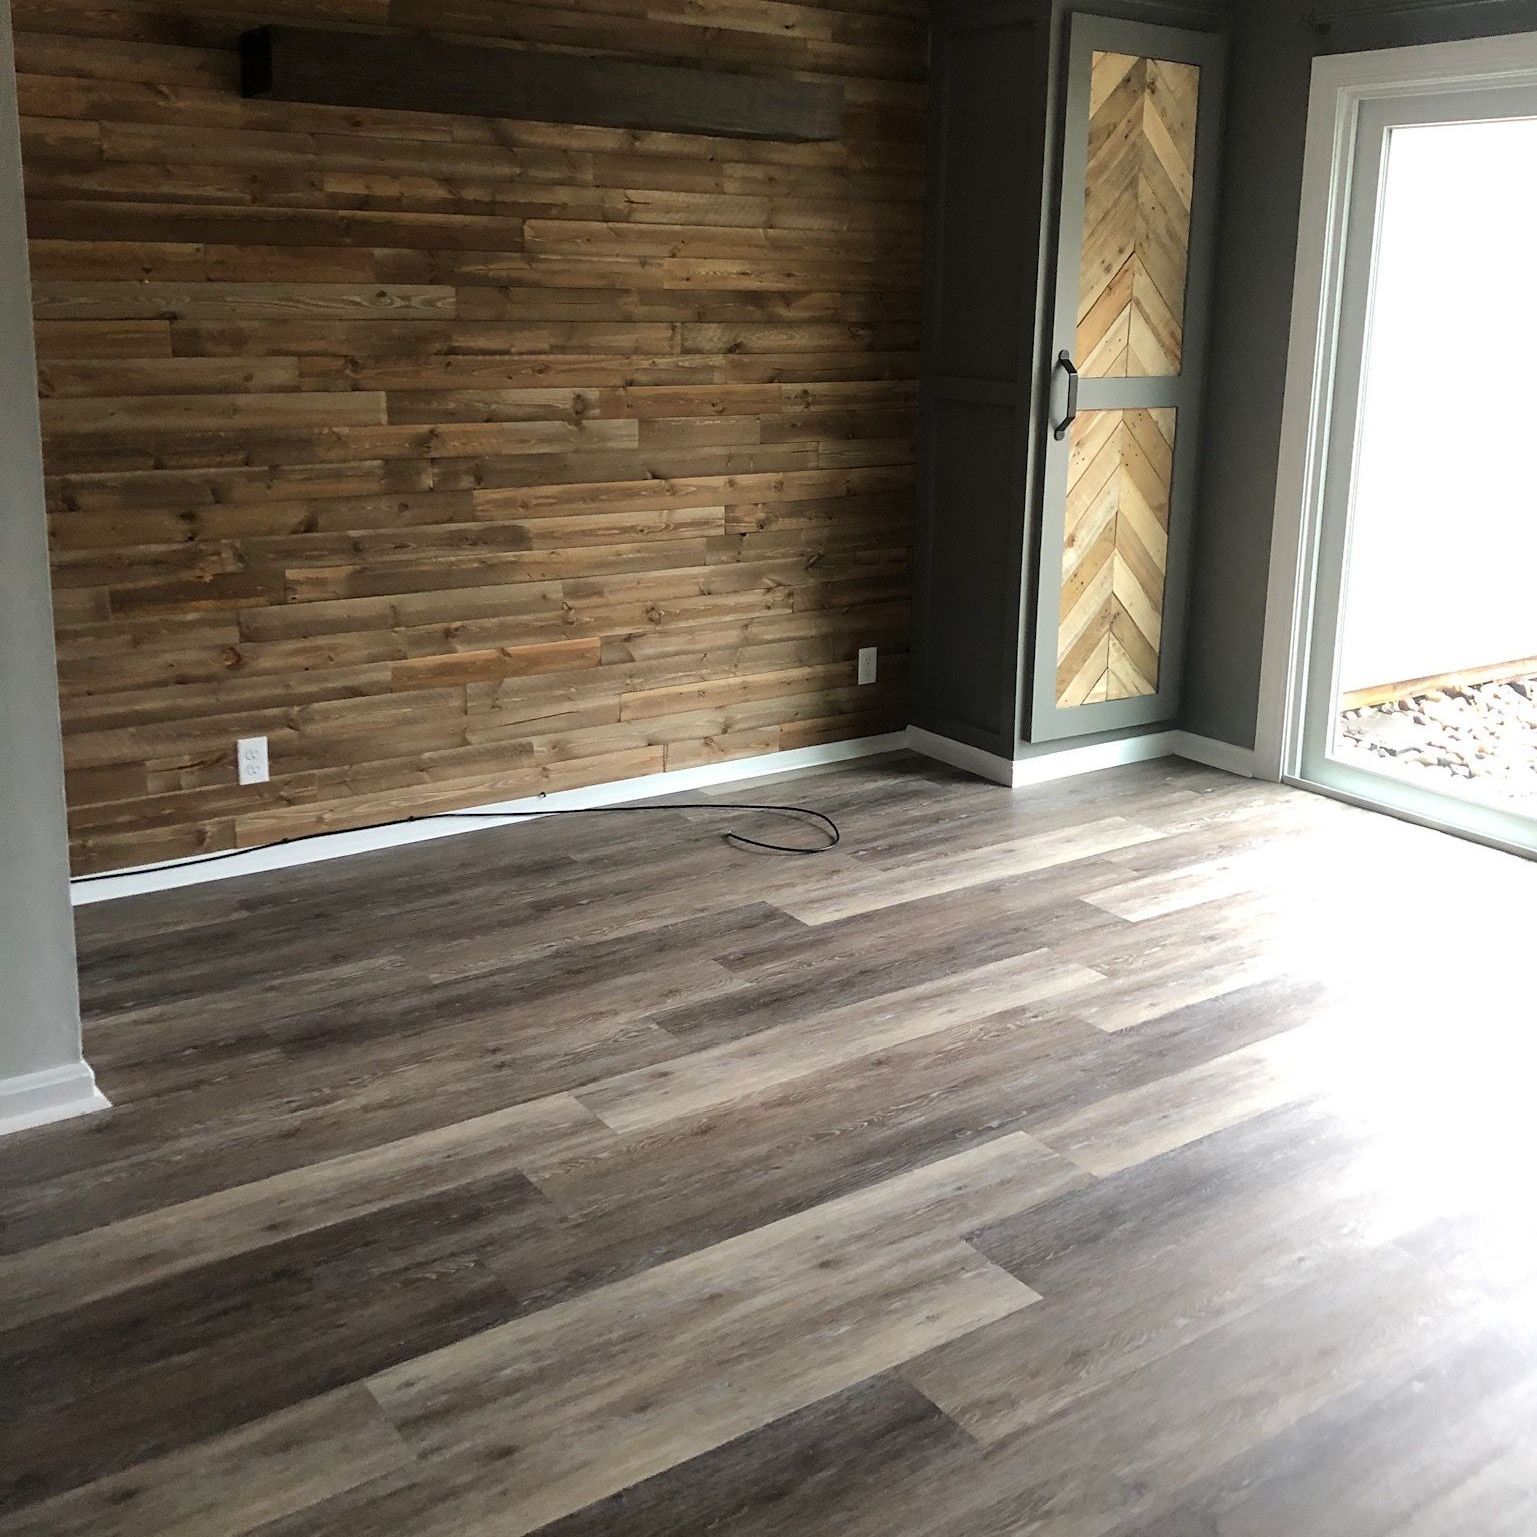 A living room with hardwood floors and a wooden wall.